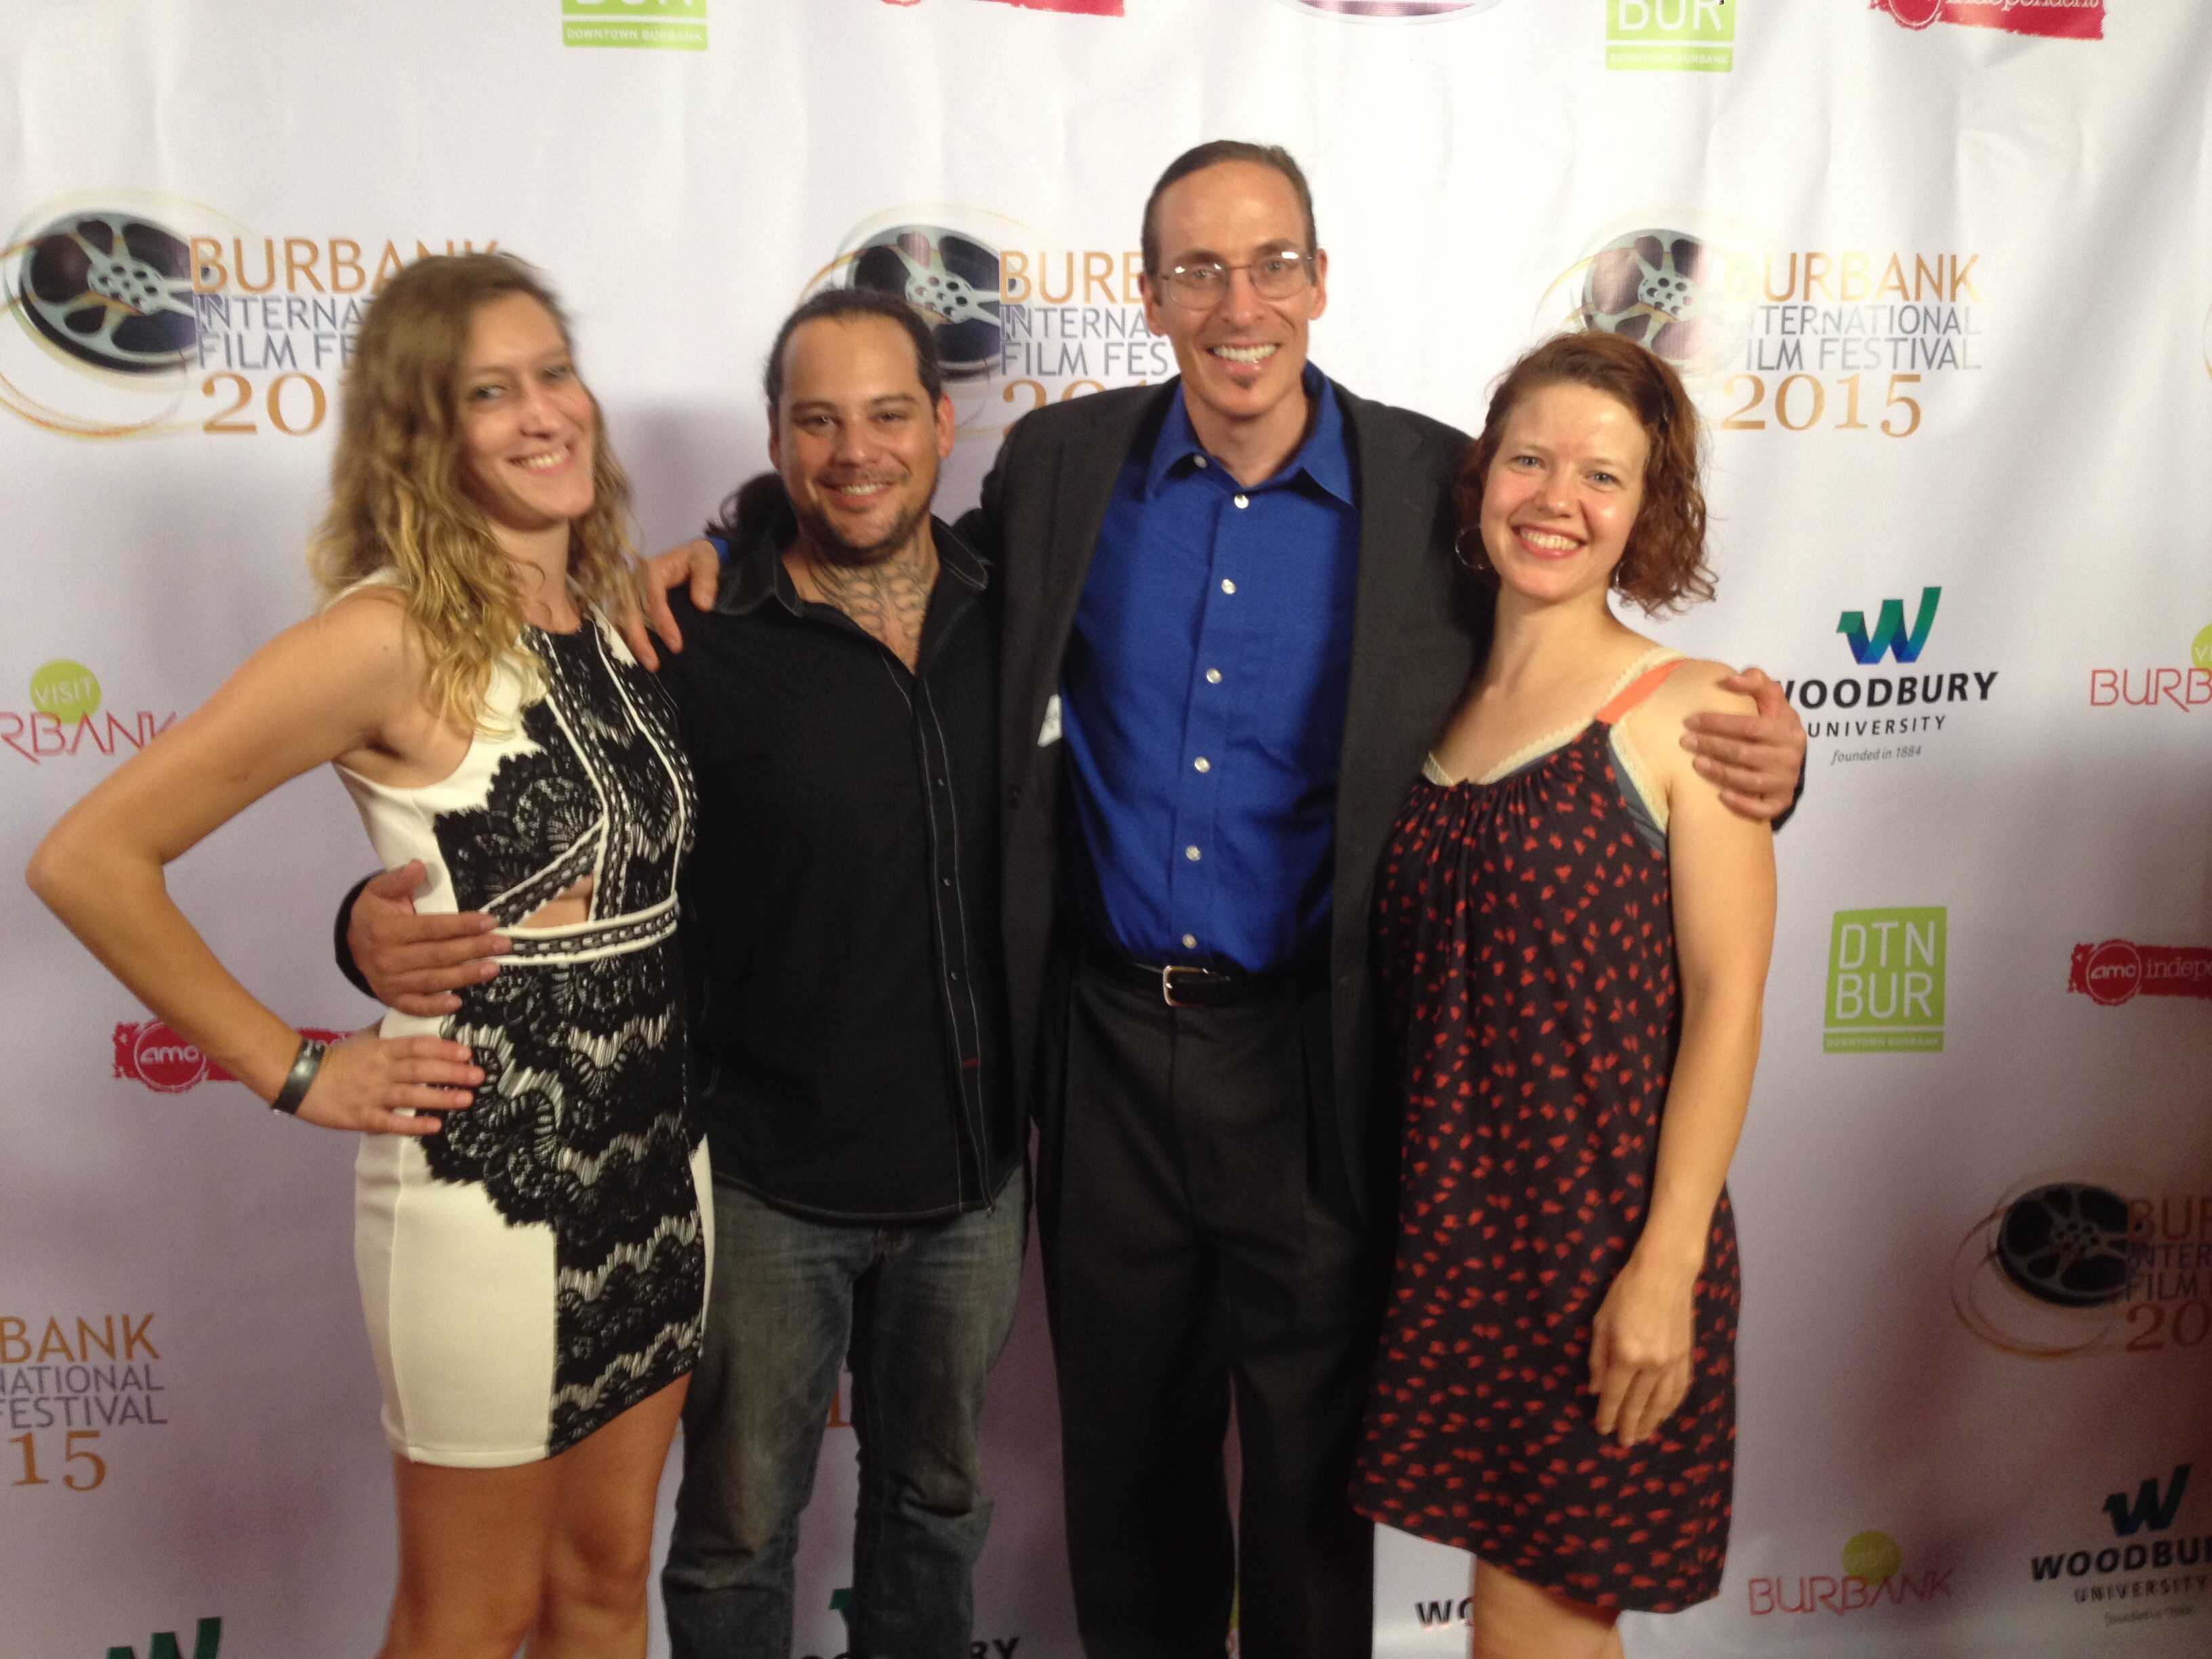 George Pappy with Leslie Marchand, Brandon Kihl & Janet Lee Rodriguez at the Burbank Int'l. Film Festival (9 Sept. 2015)